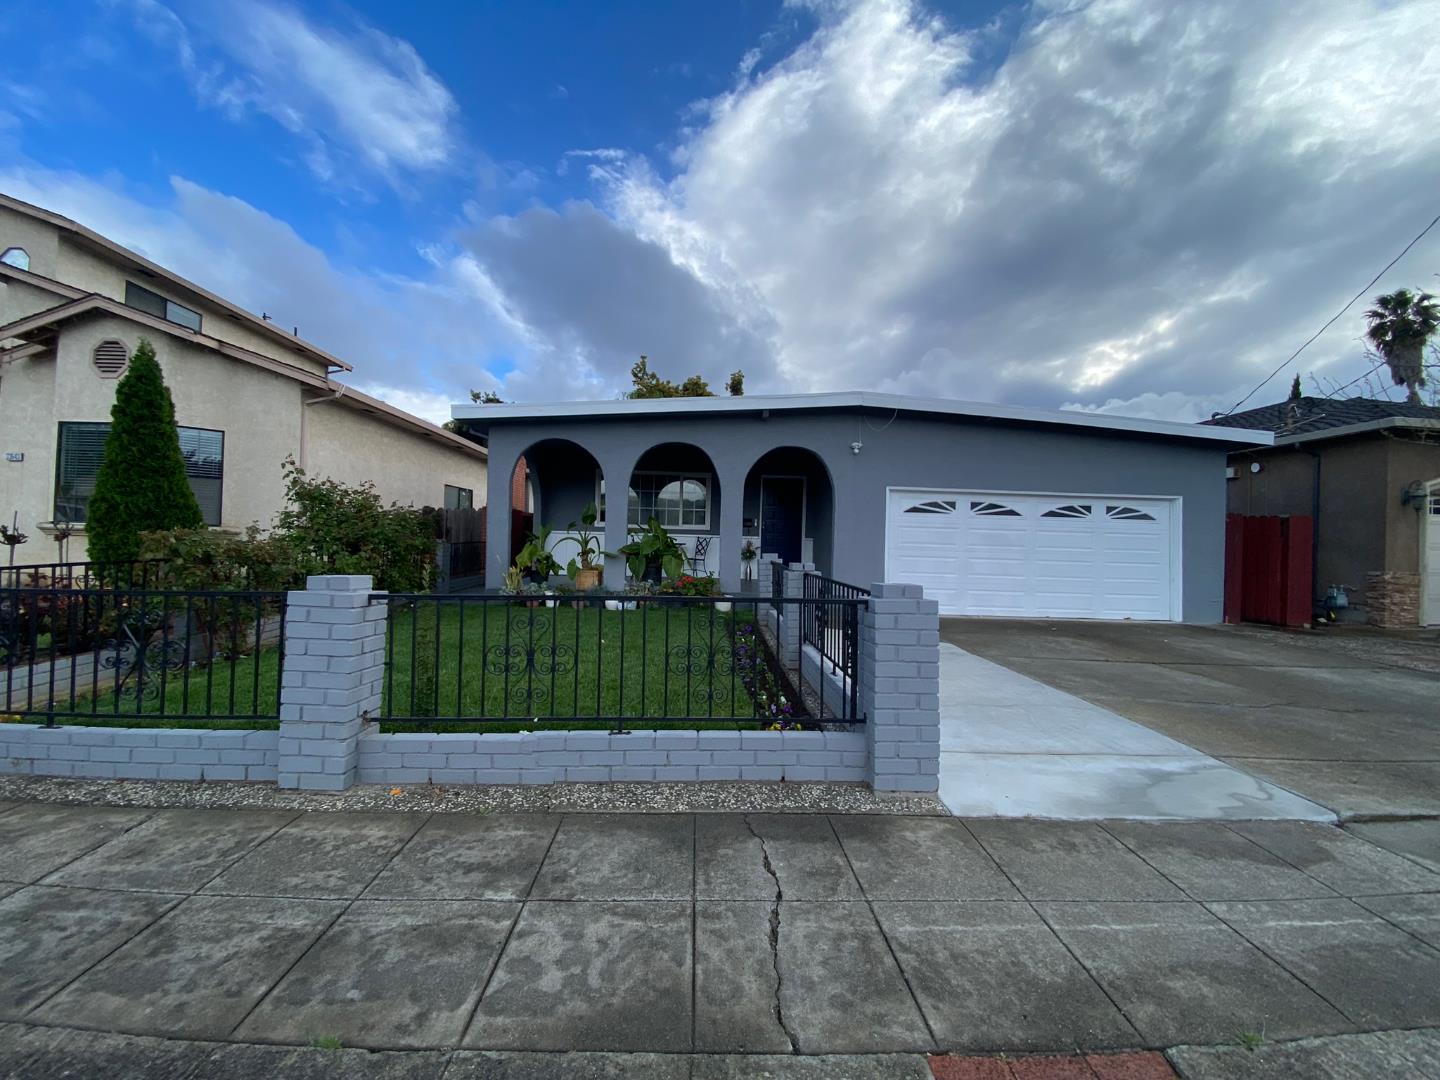 Photo of 33635 14th St in Union City, CA